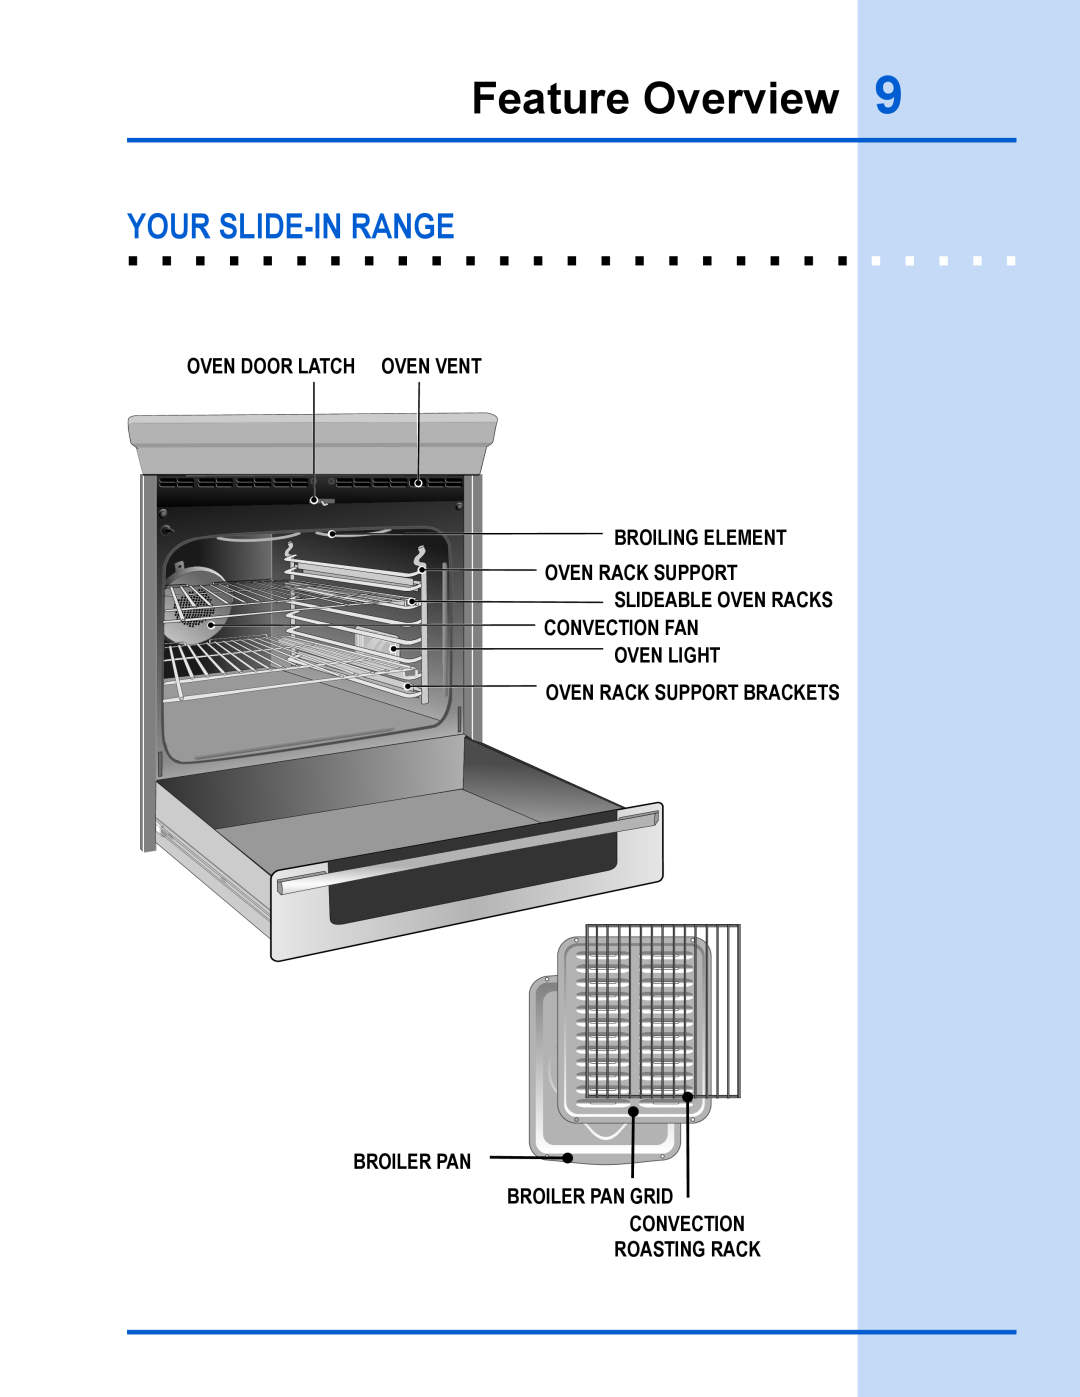 Electrolux EW30GS65GS Feature Overview, Oven Door Latch Oven vent, Broiling Element, Oven Rack Support, Convection Fan 